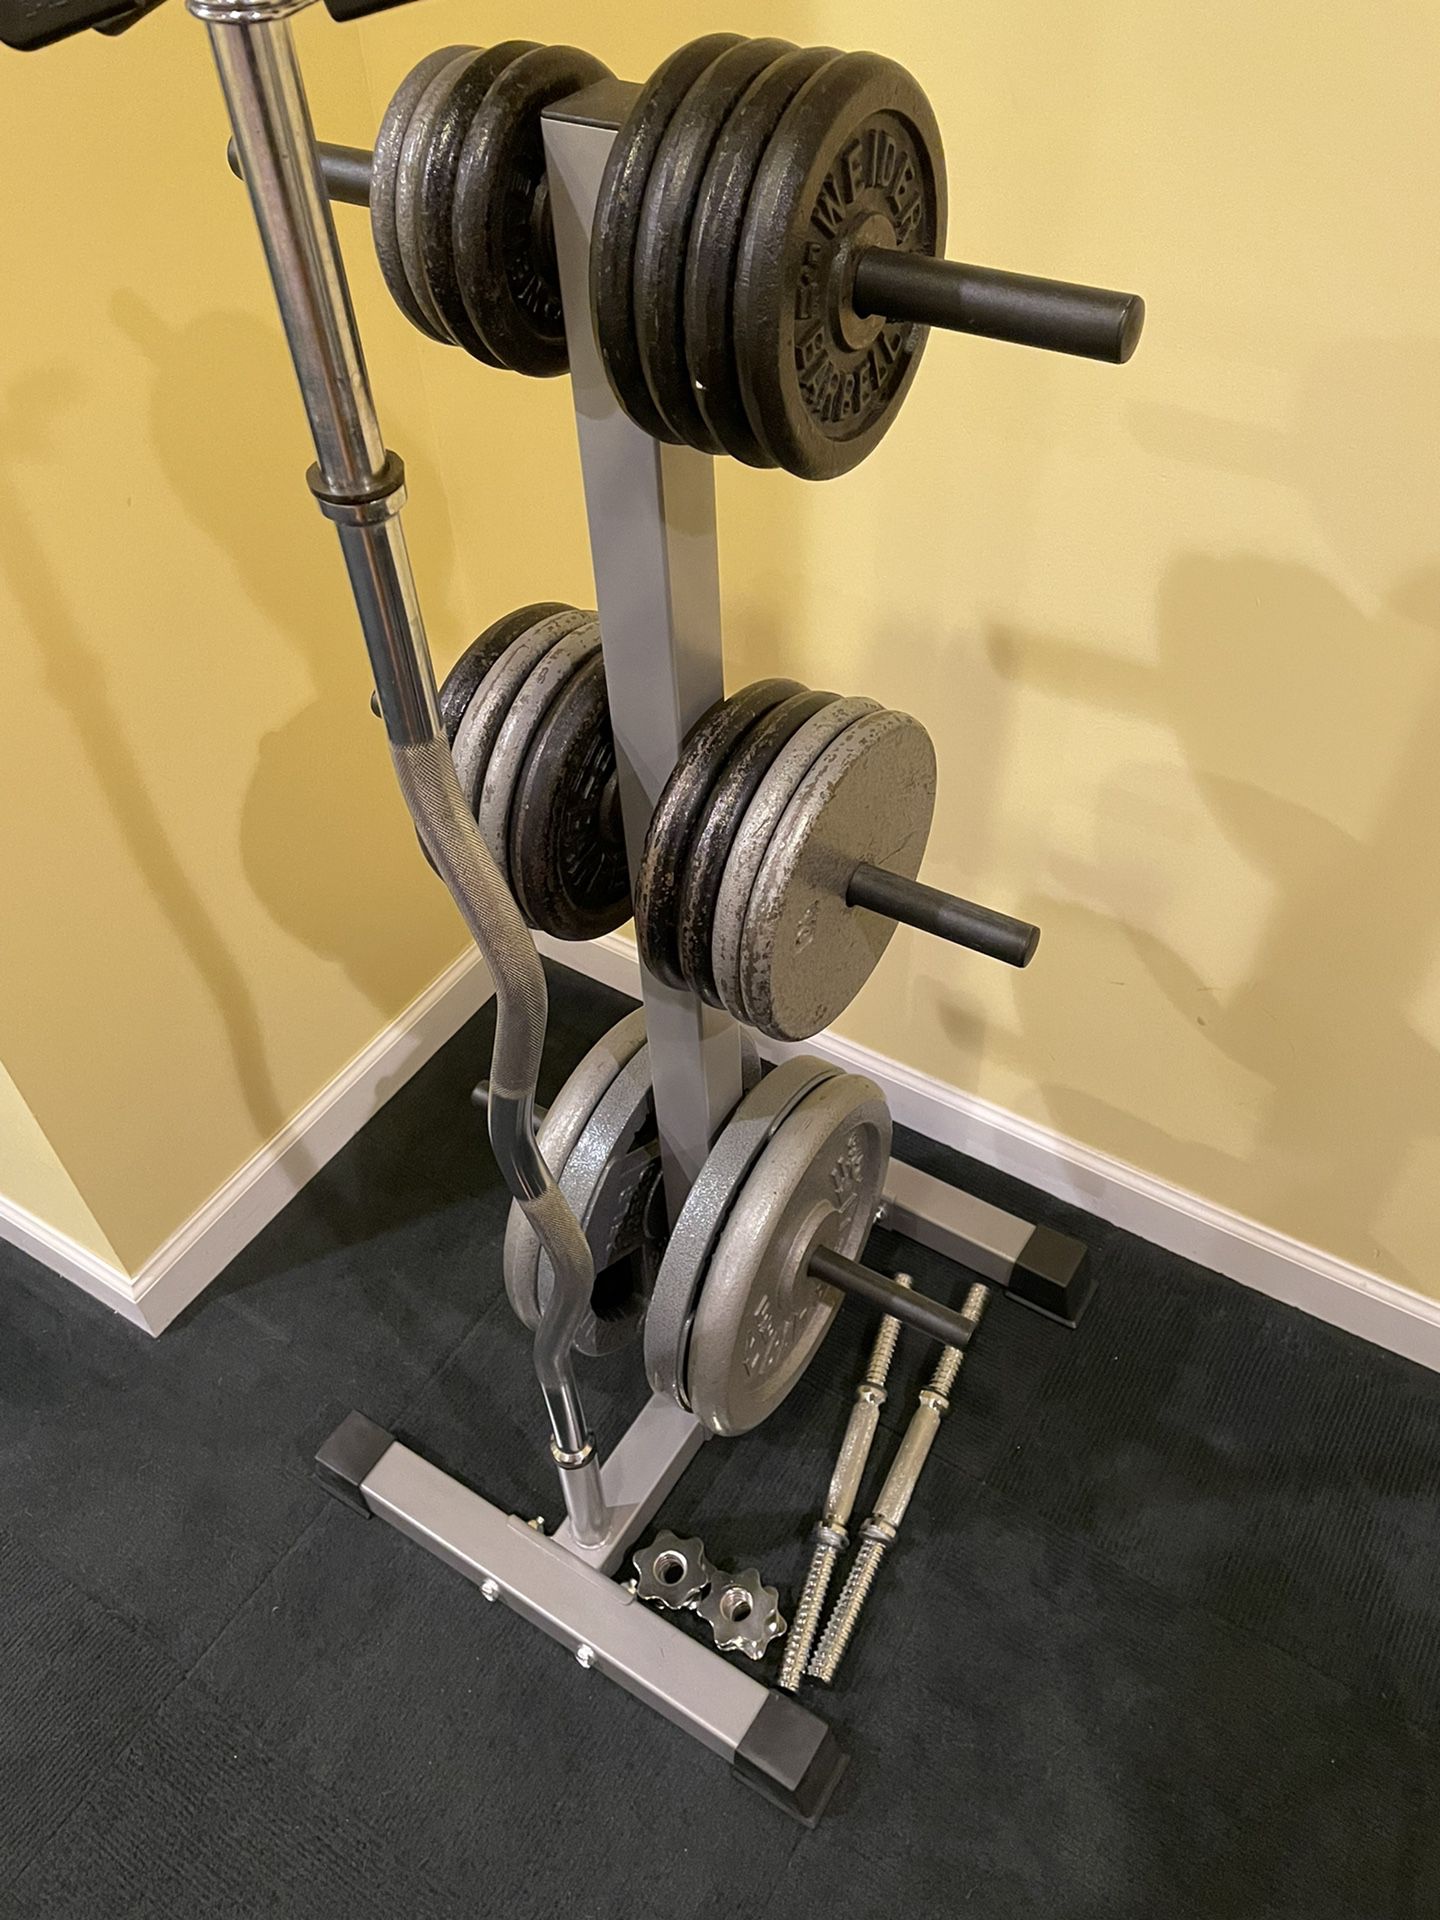 Weights, Valor Fitness Weight Tree, EZ Curl Bar, Spin Lock DB Handles